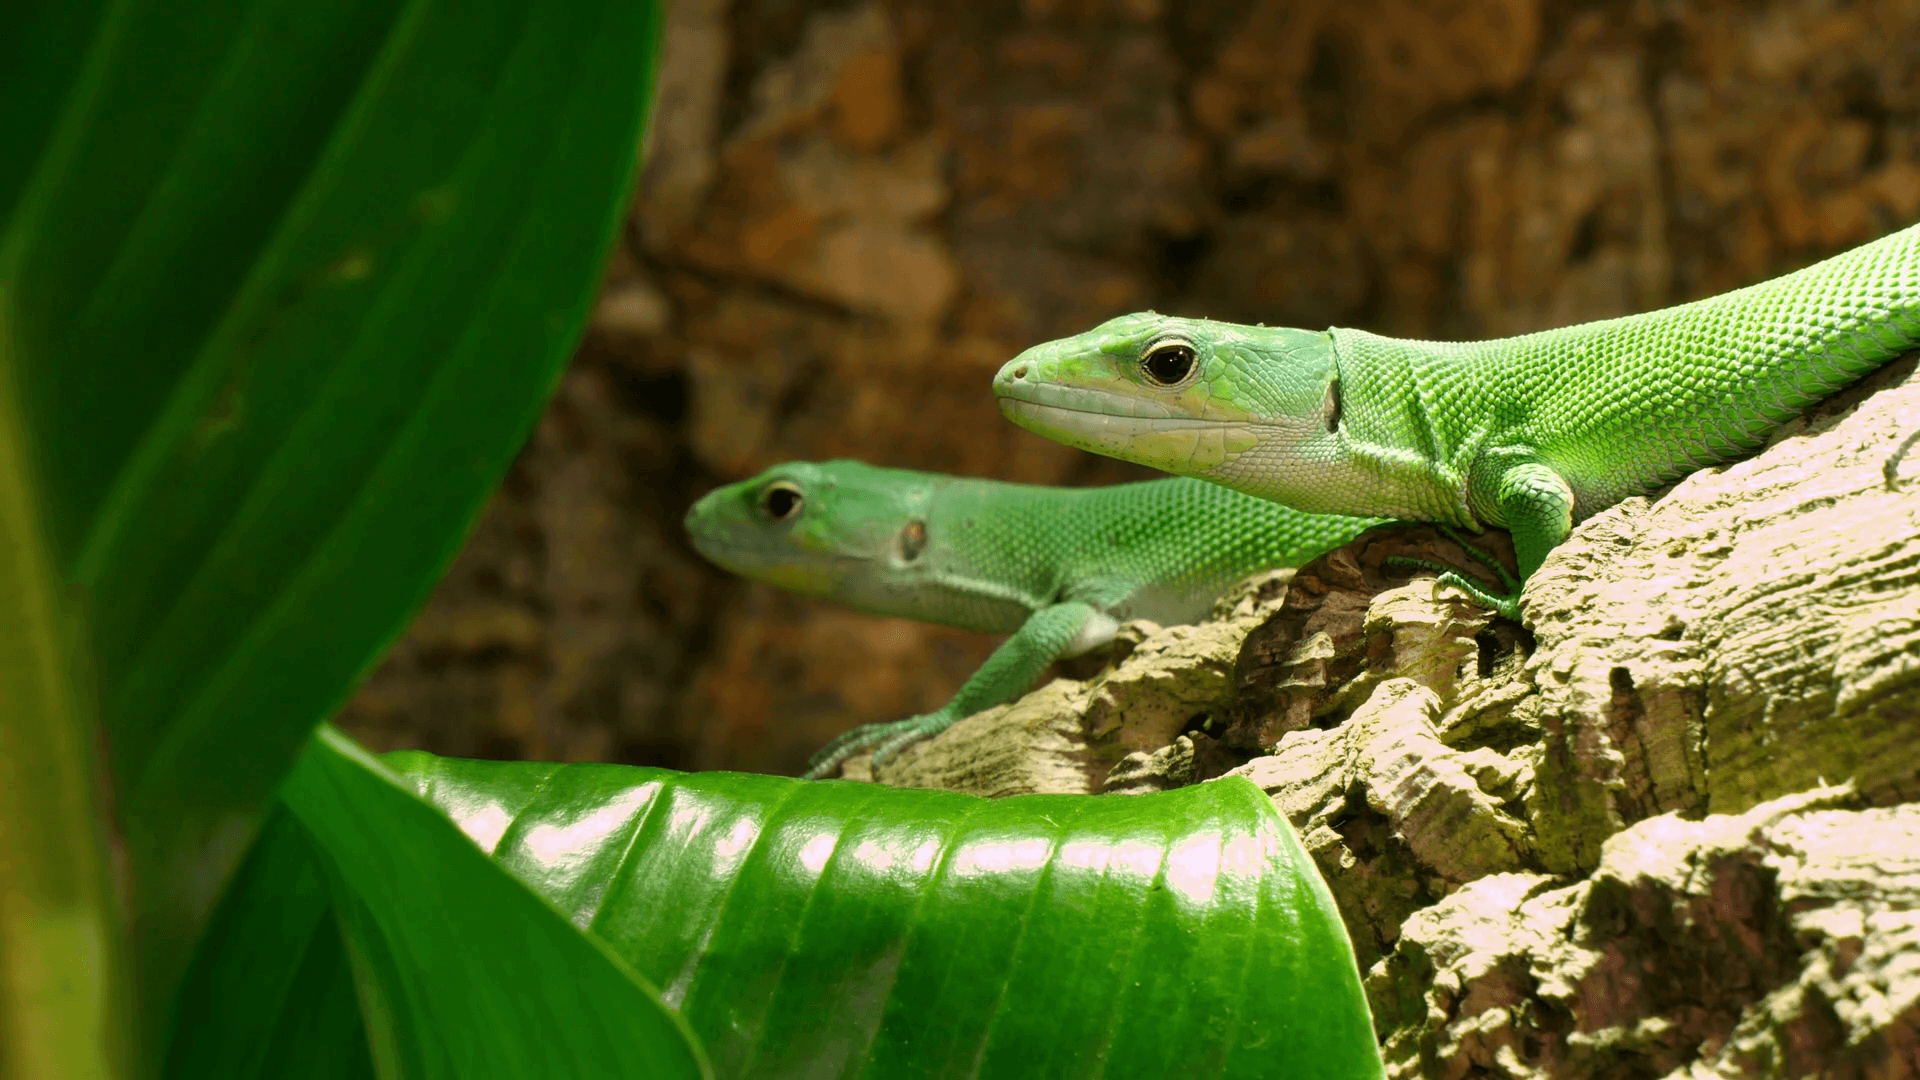 Green Lactide Lizards Gastropholis Prasina Couple Gastropholis is a genus of Equatorial African lacertid lizards of the family Lacertidae. Not much is